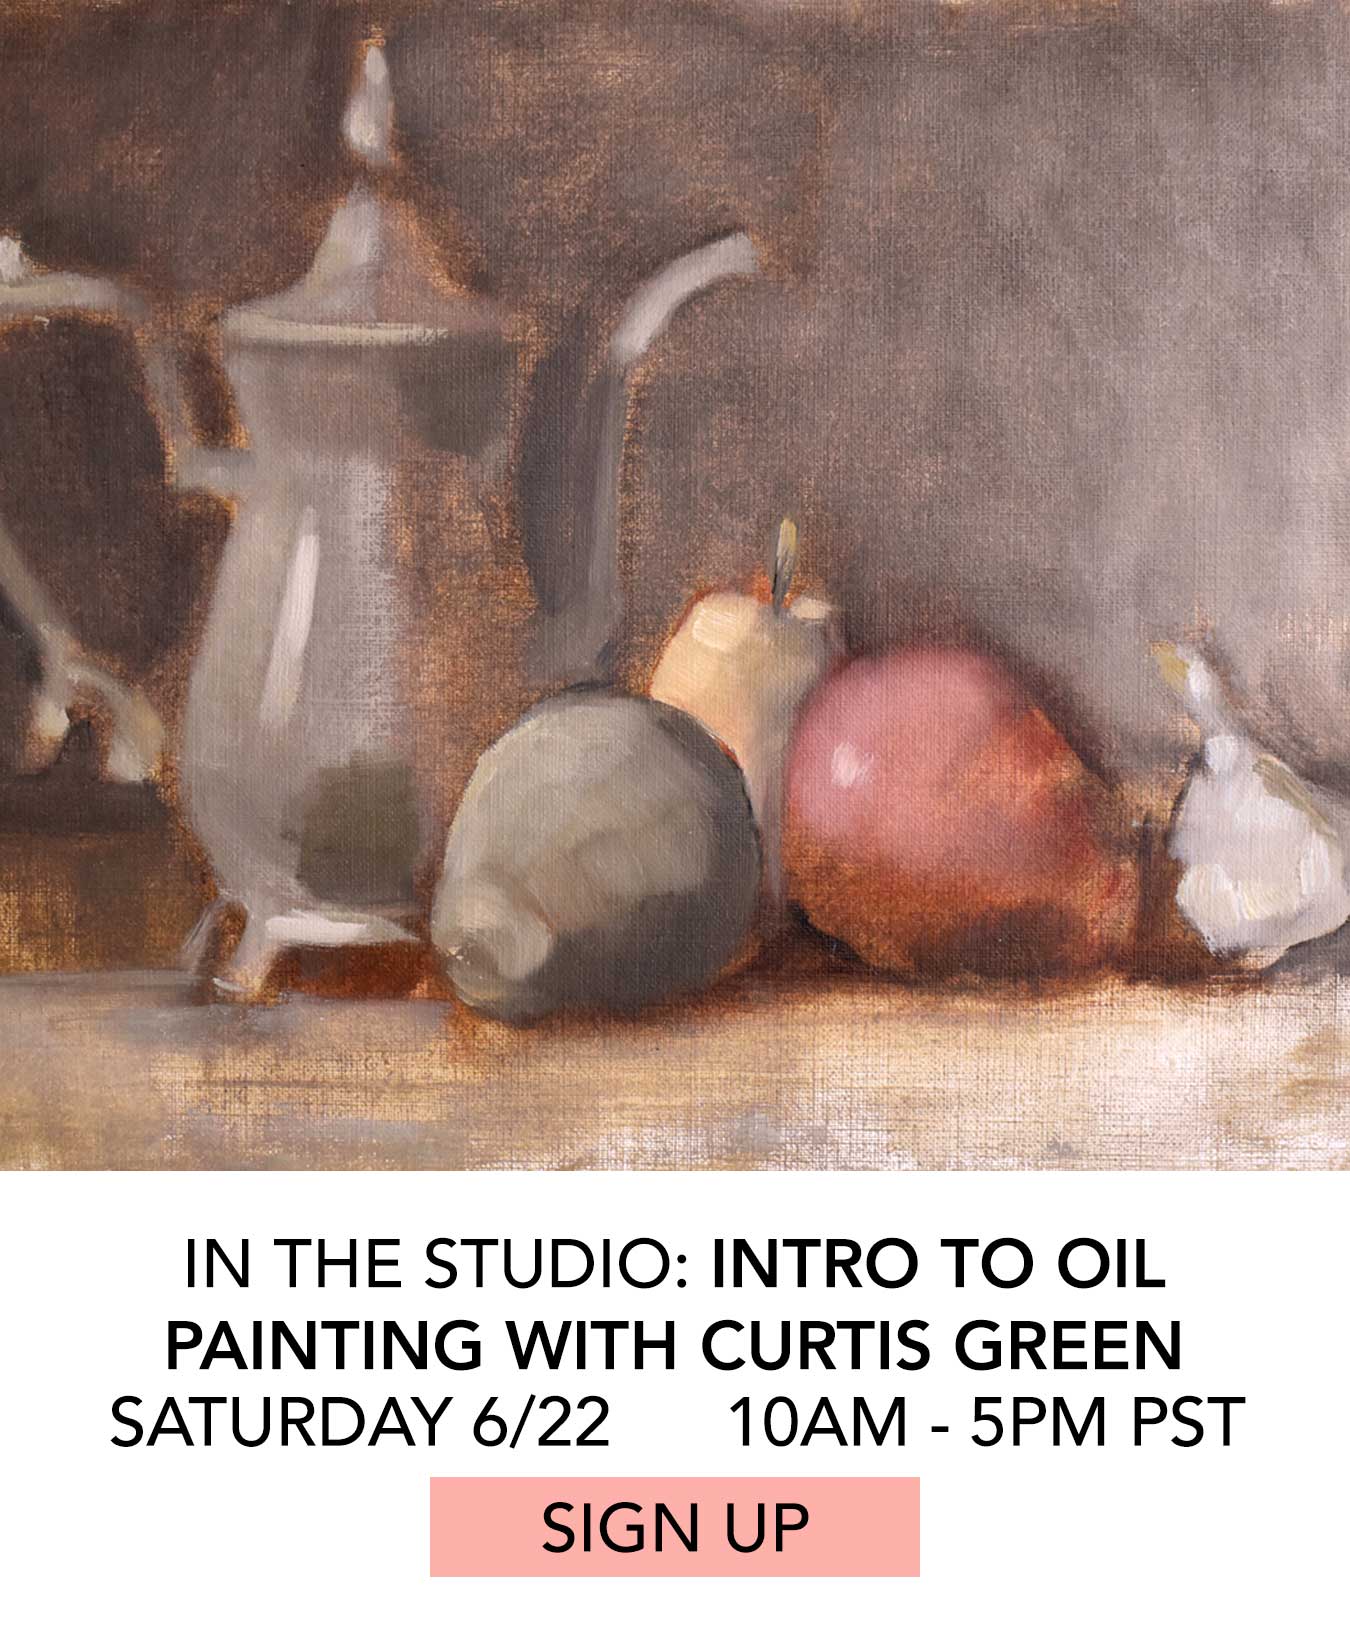 In the Studio: Intro to Oil Painting with Curtis Green. Sunday 6/2 from 10:00am to 5:00pm. Click to Sign Up.